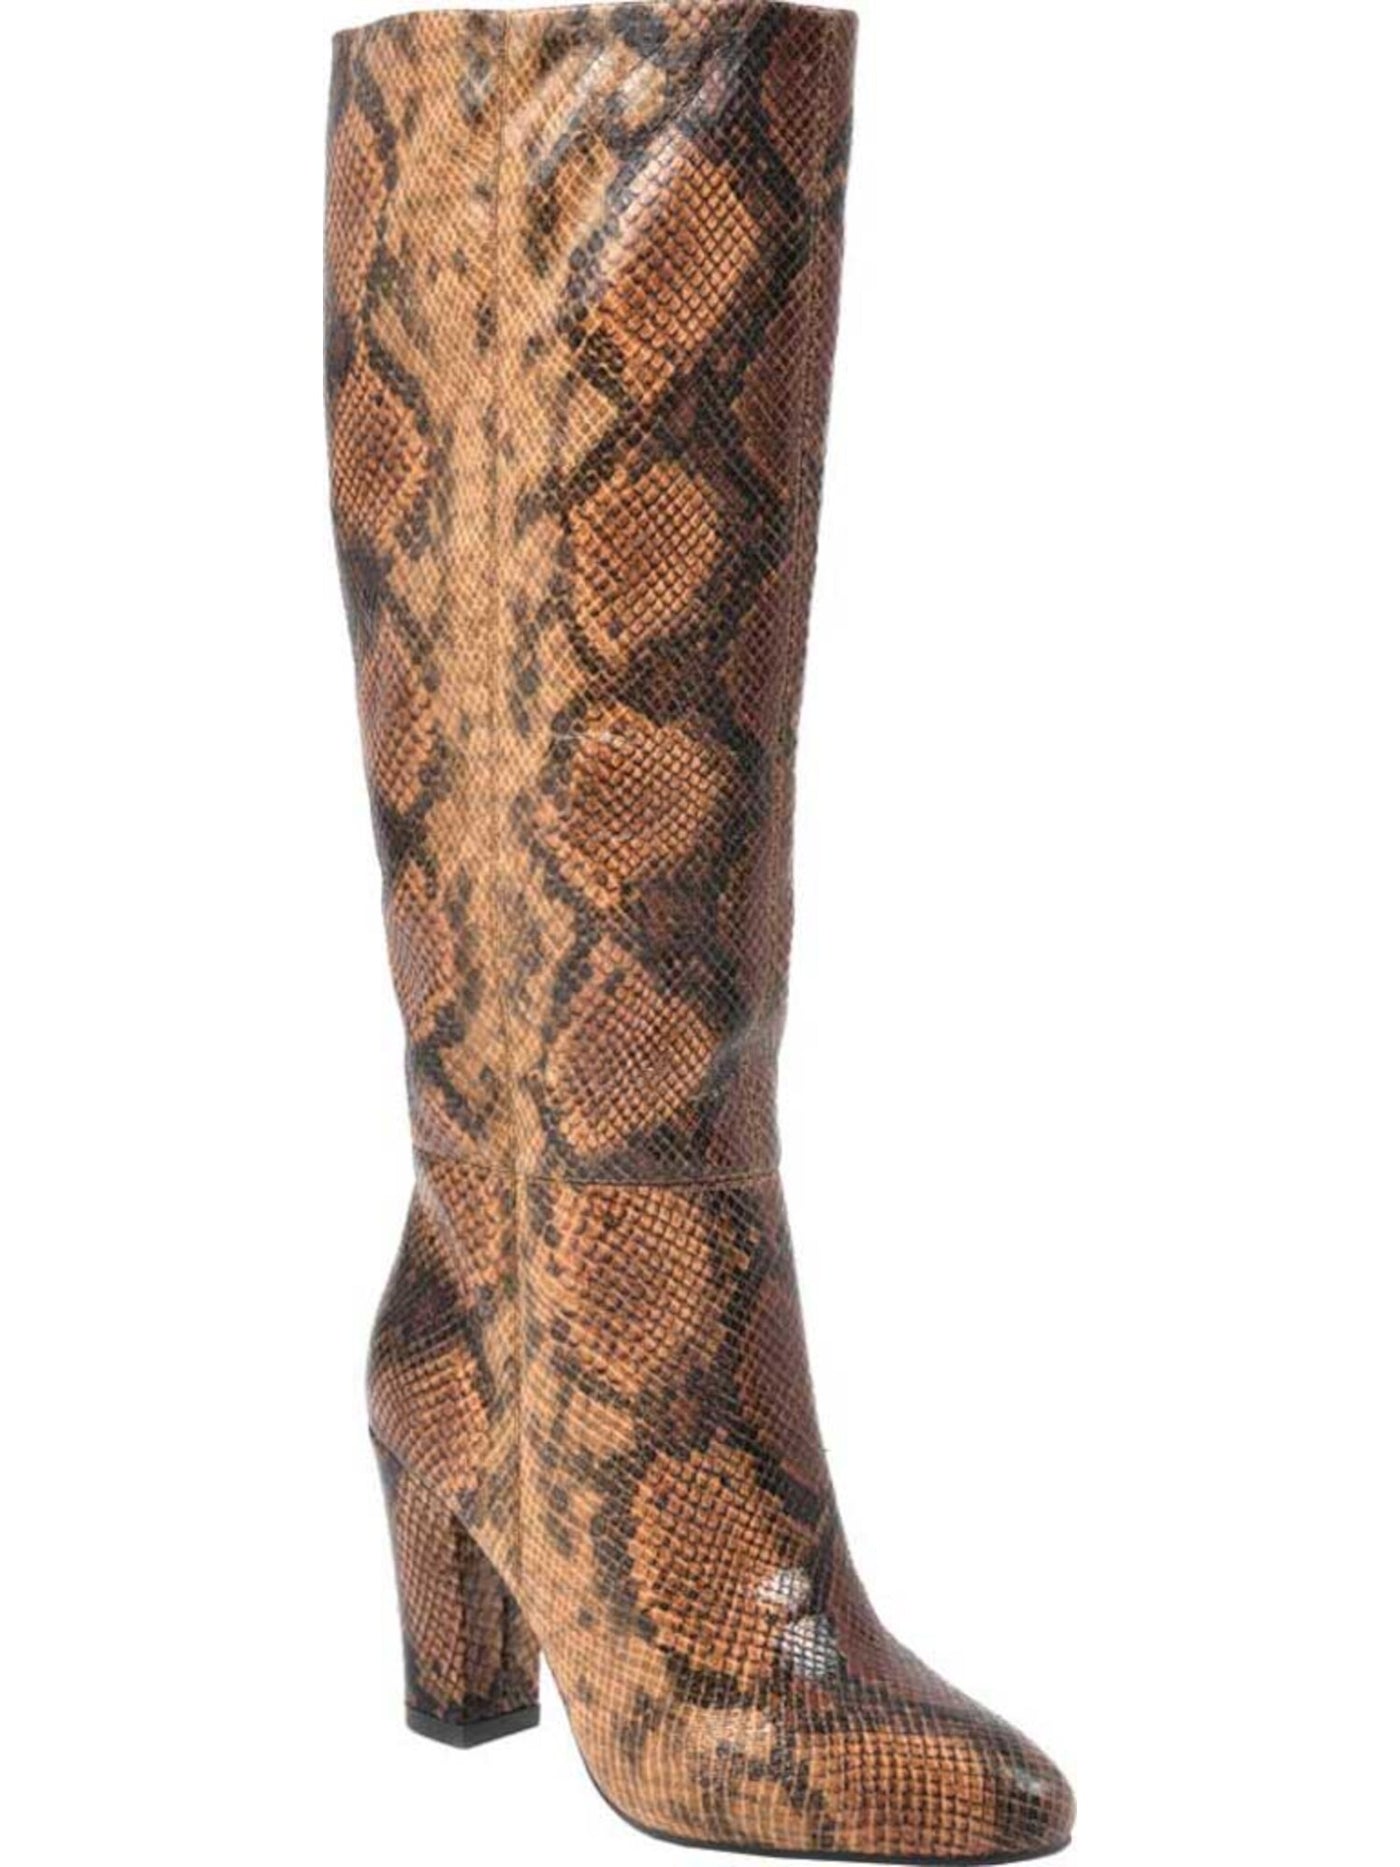 WHITE MOUNTAIN Womens Brown Animal Print Cushioned Almond Toe Sculpted Heel Dress Boots 5